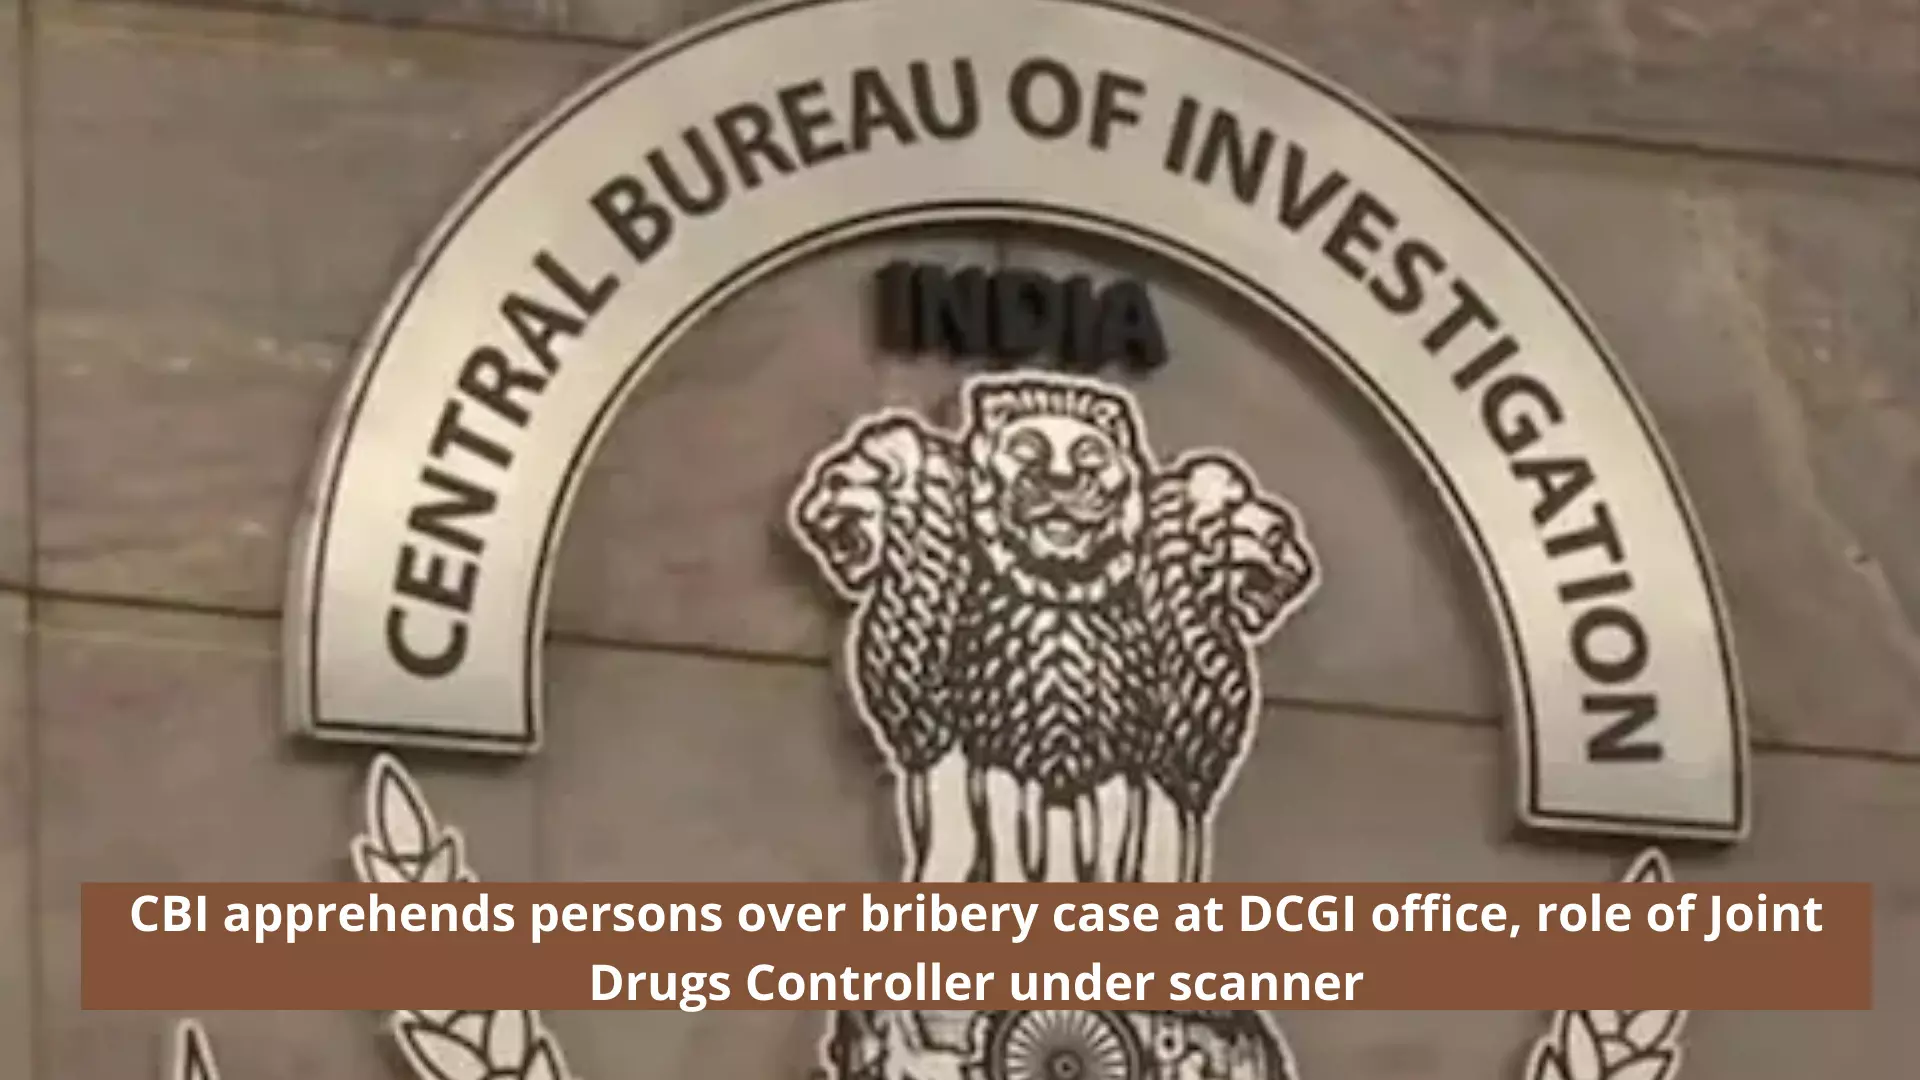 CBI apprehends persons over bribery case at DCGI office, role of Joint Drugs Controller under scanner